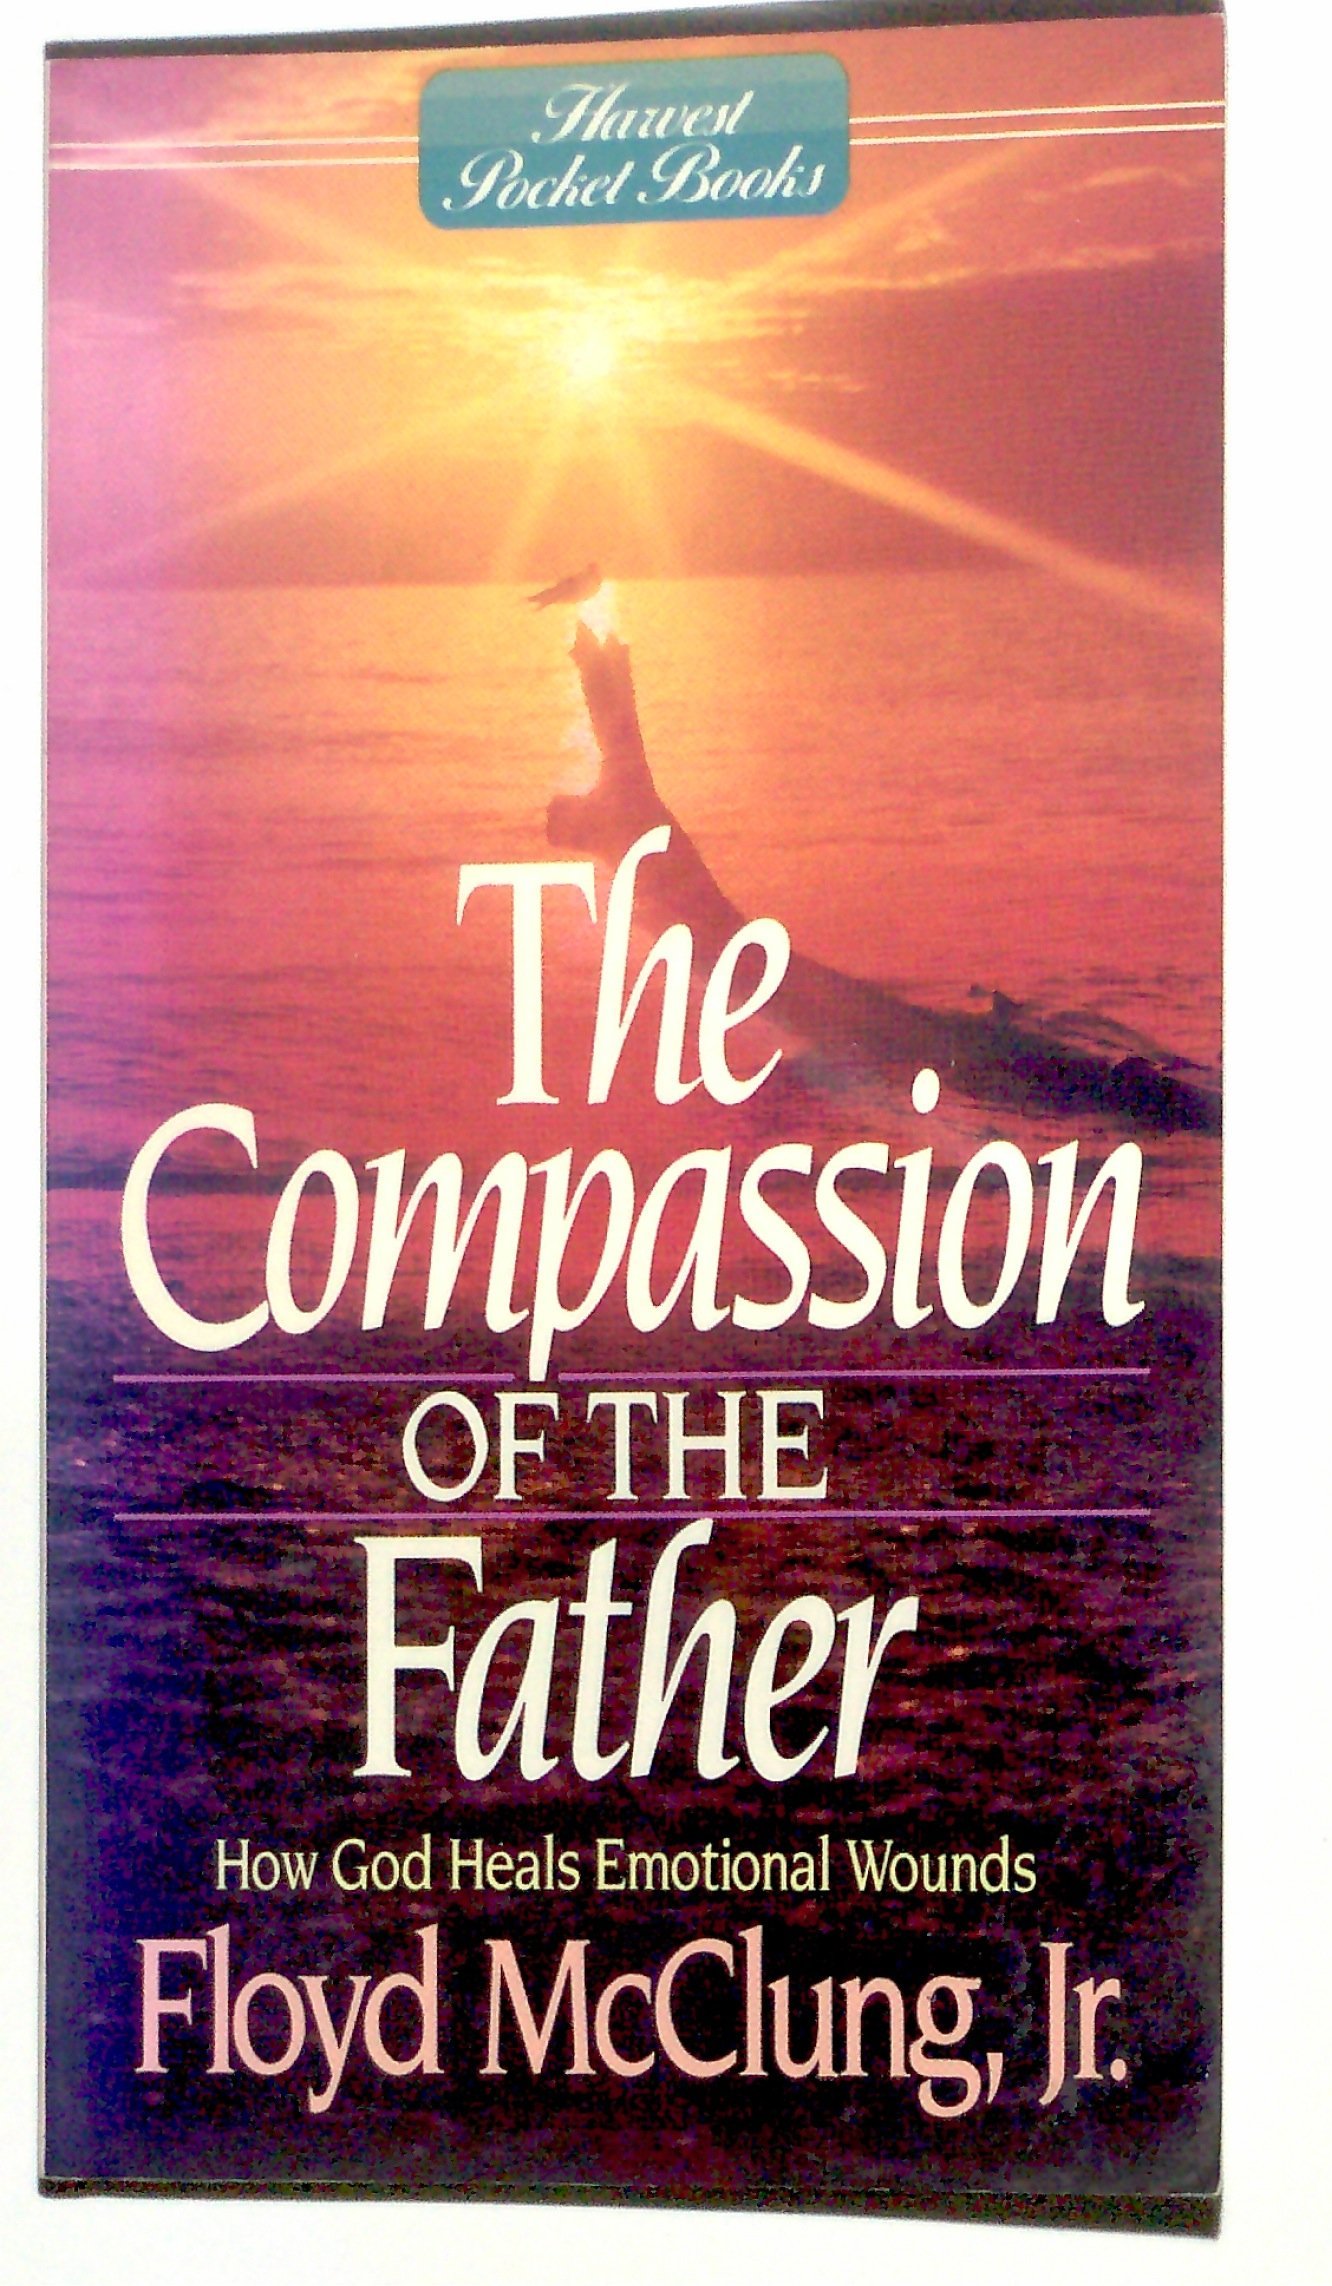 The Compassion of the Father